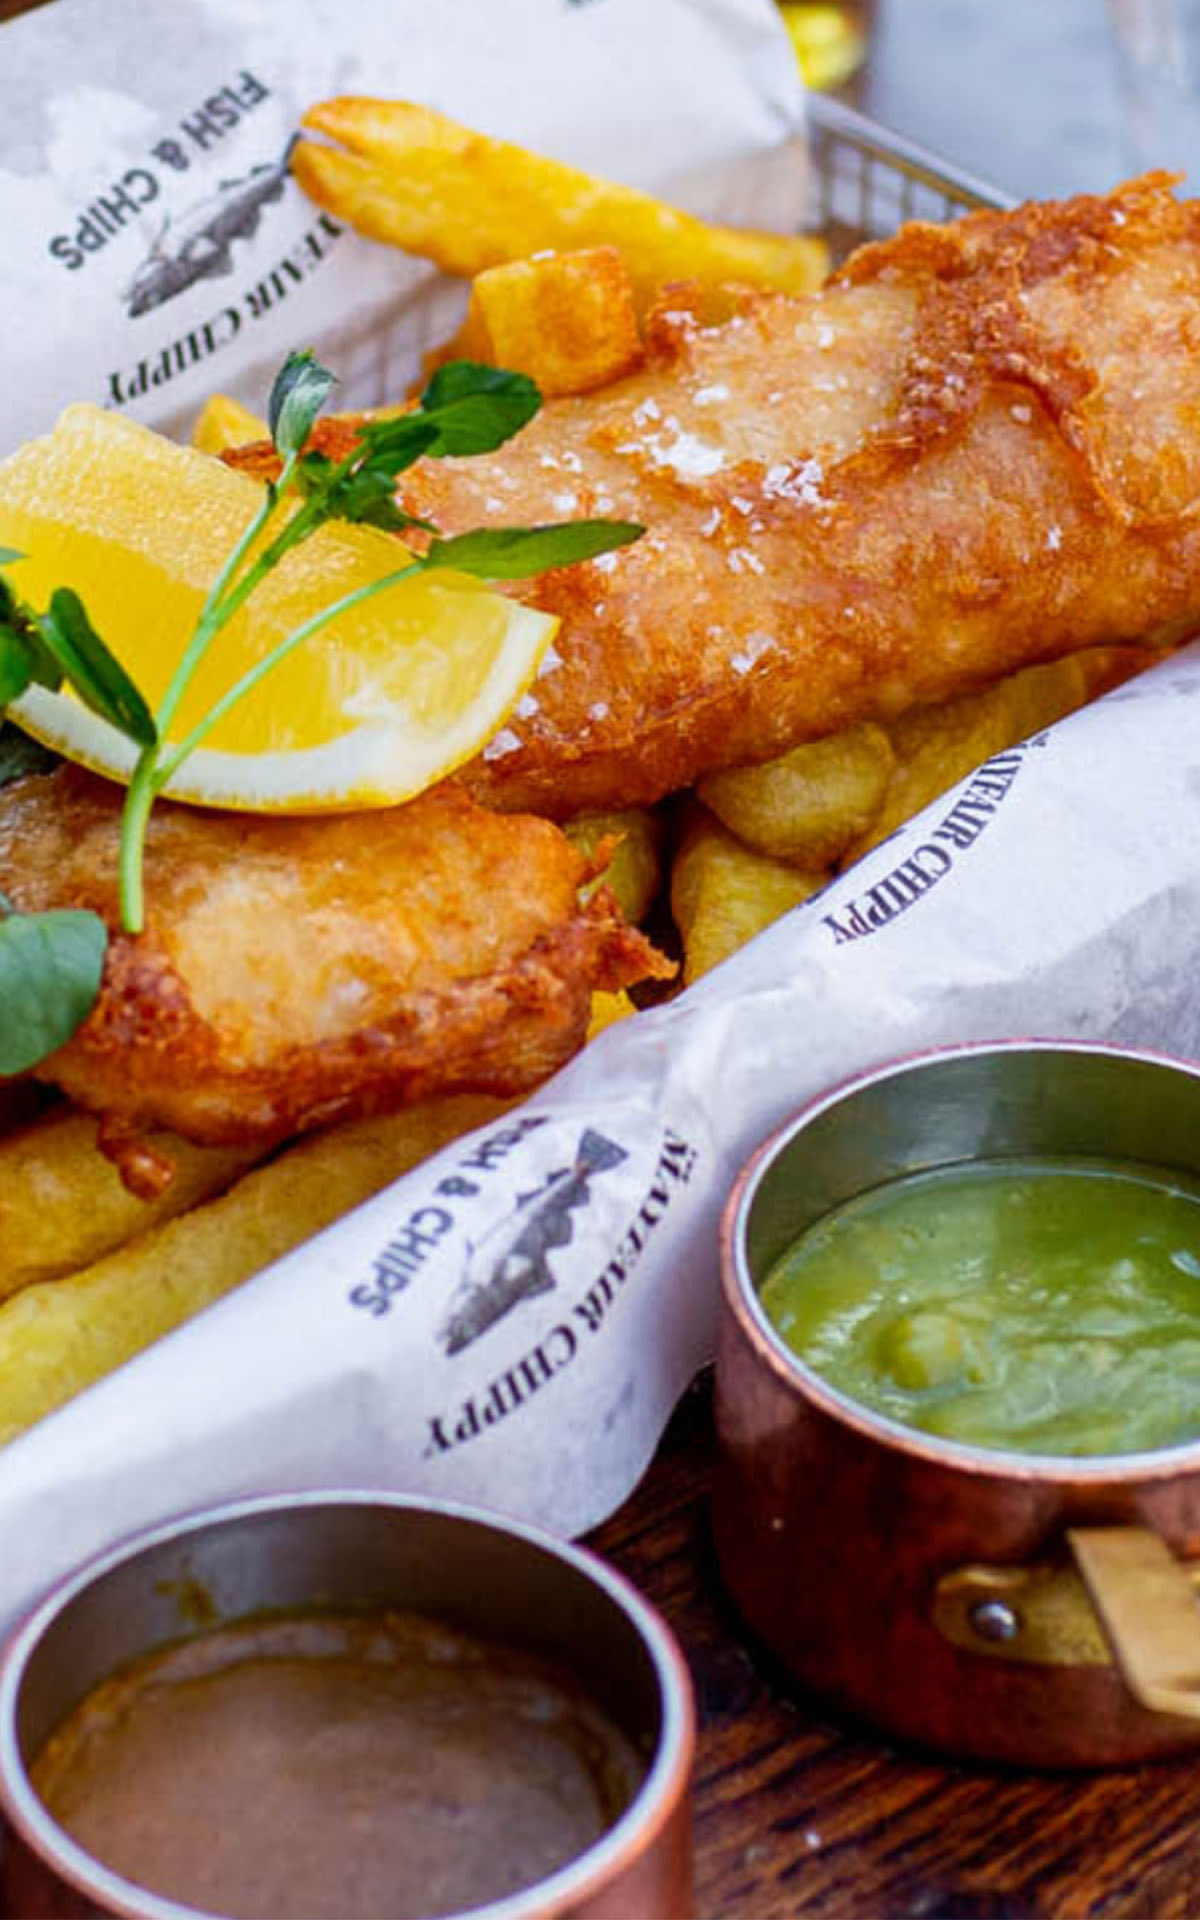 fish-and-chips-at-the-mayfair-chippy-bicester-village